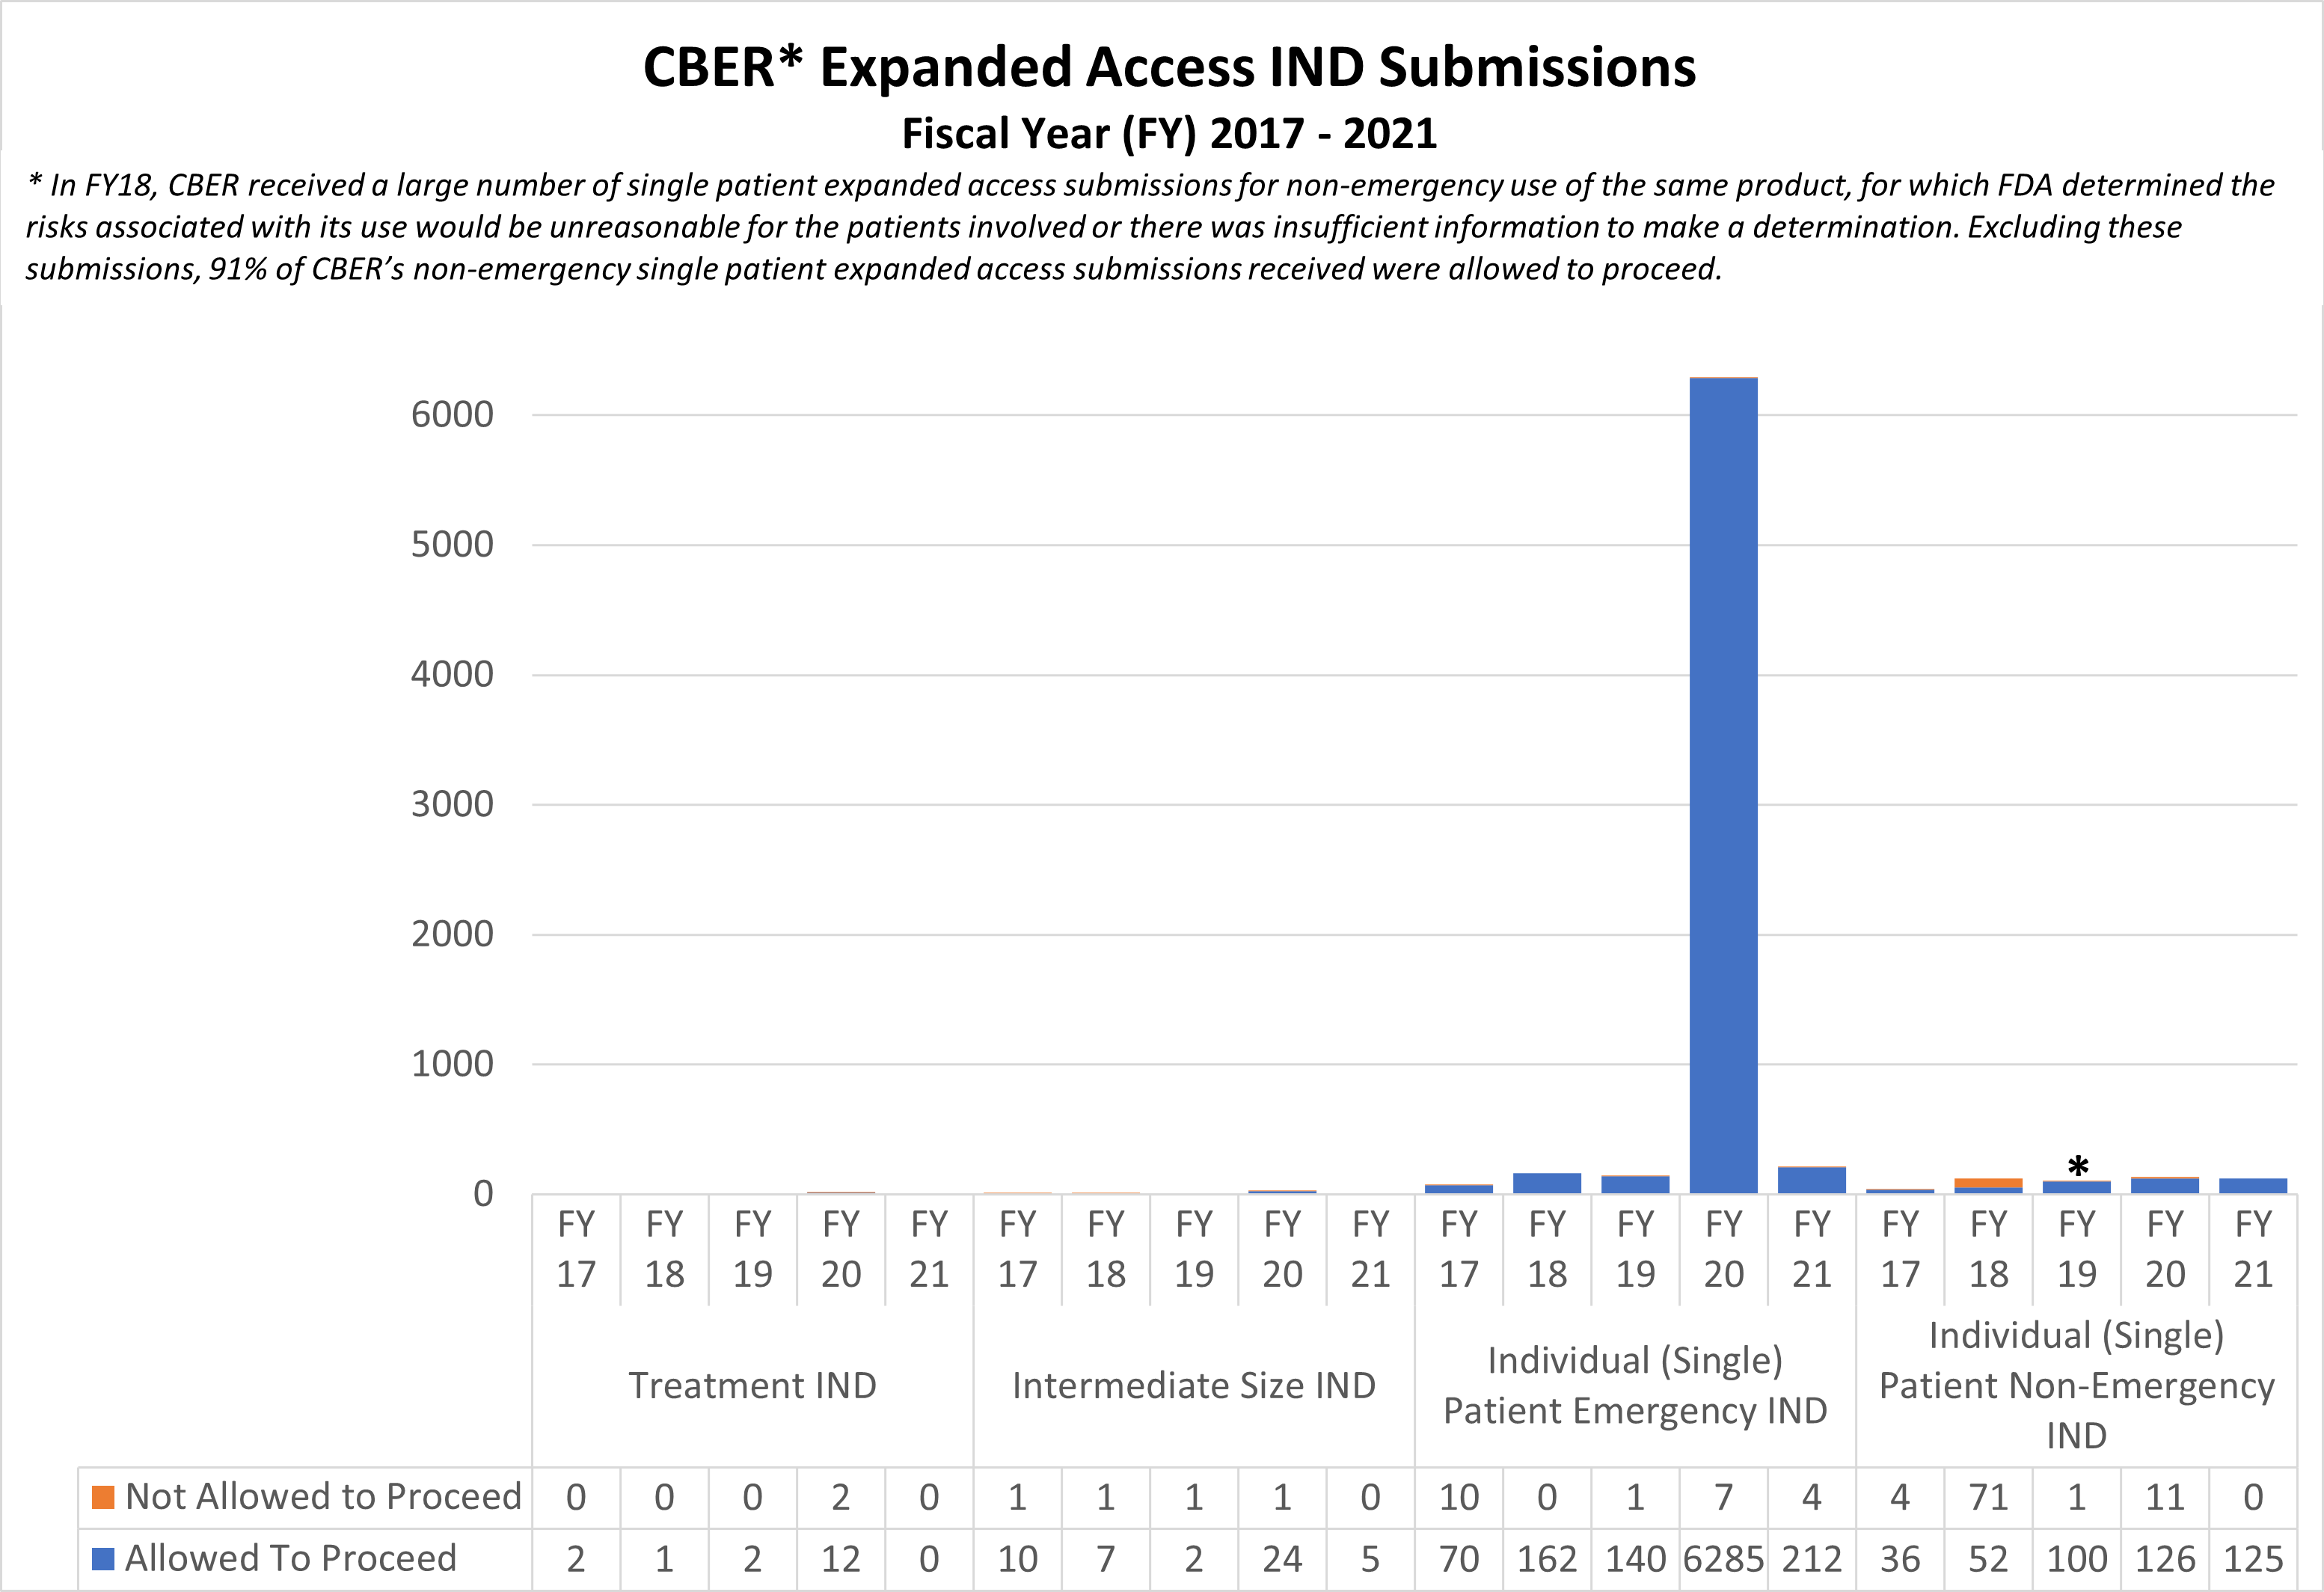 CBER Expanded Access INDs (2017-2021)